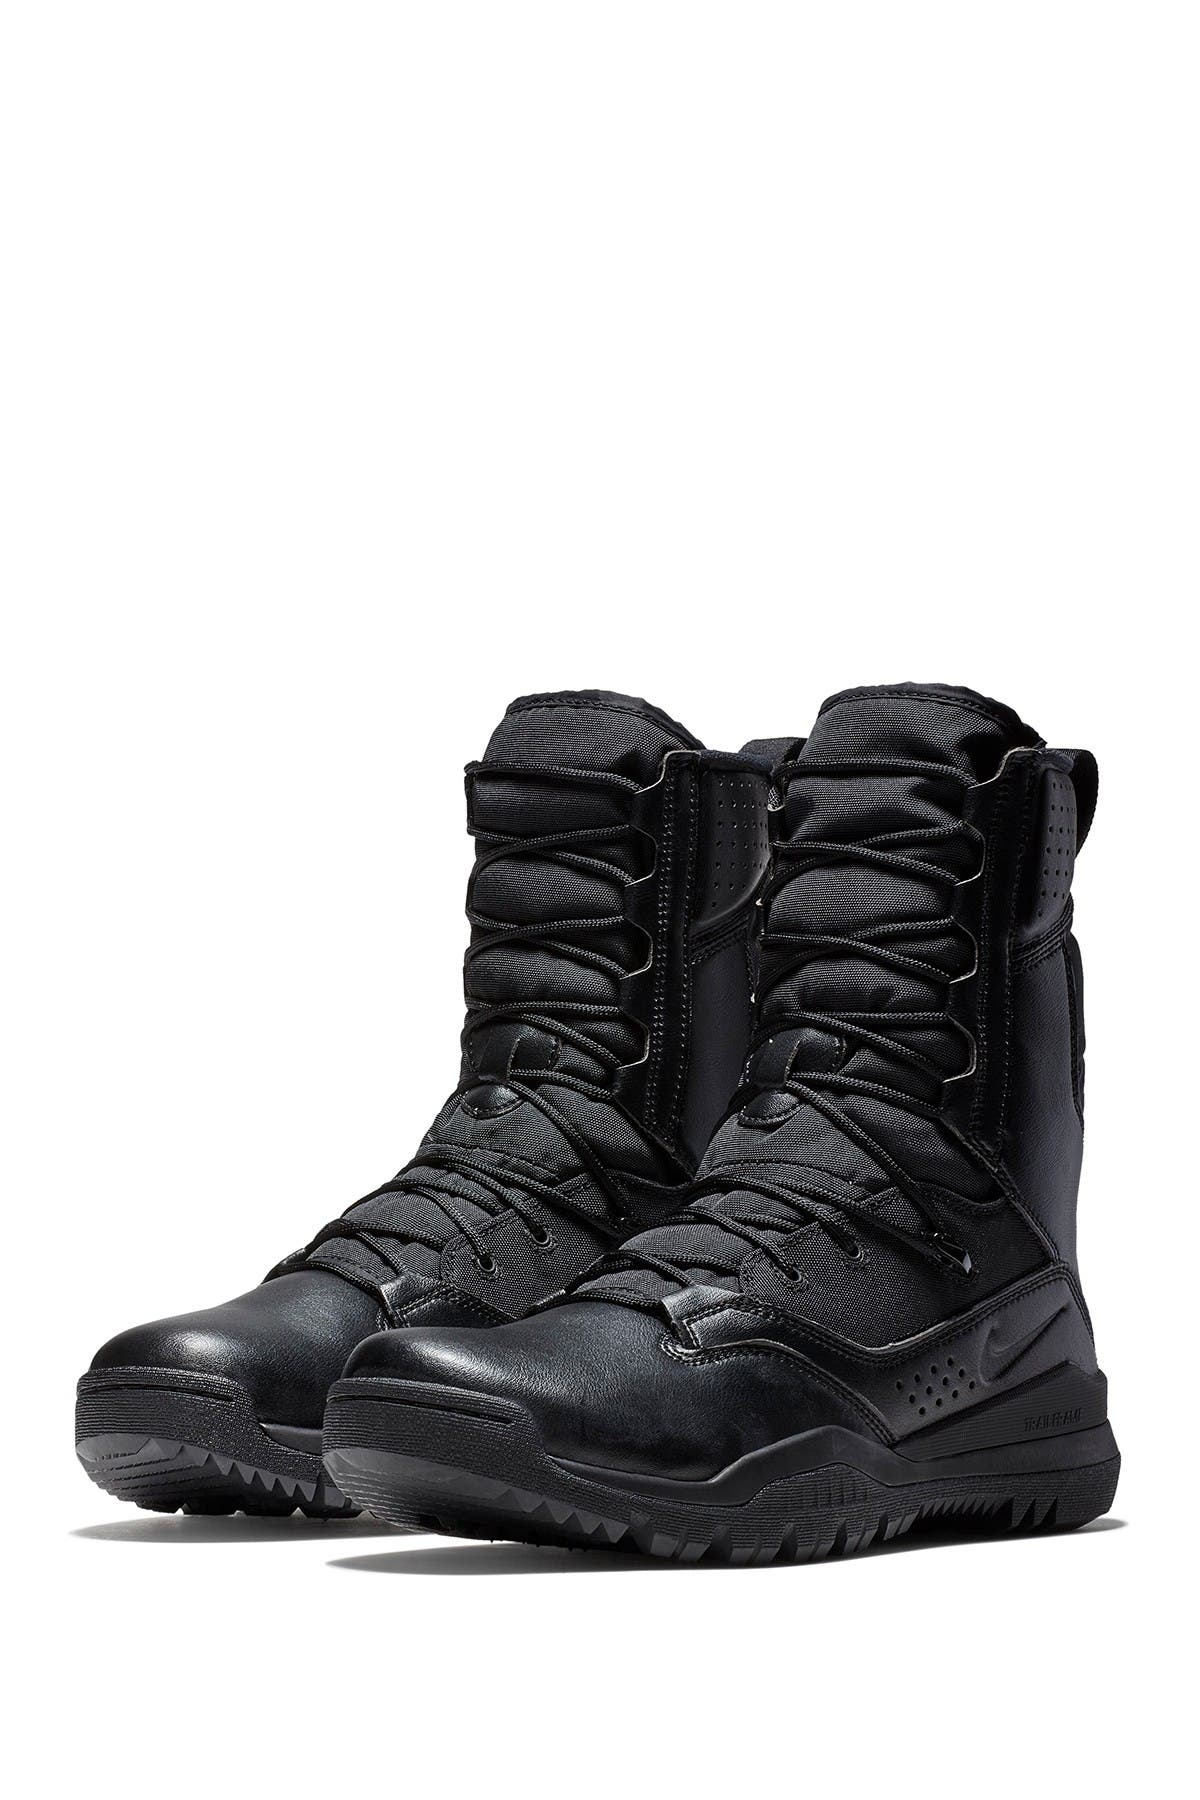 nike tactical boots womens